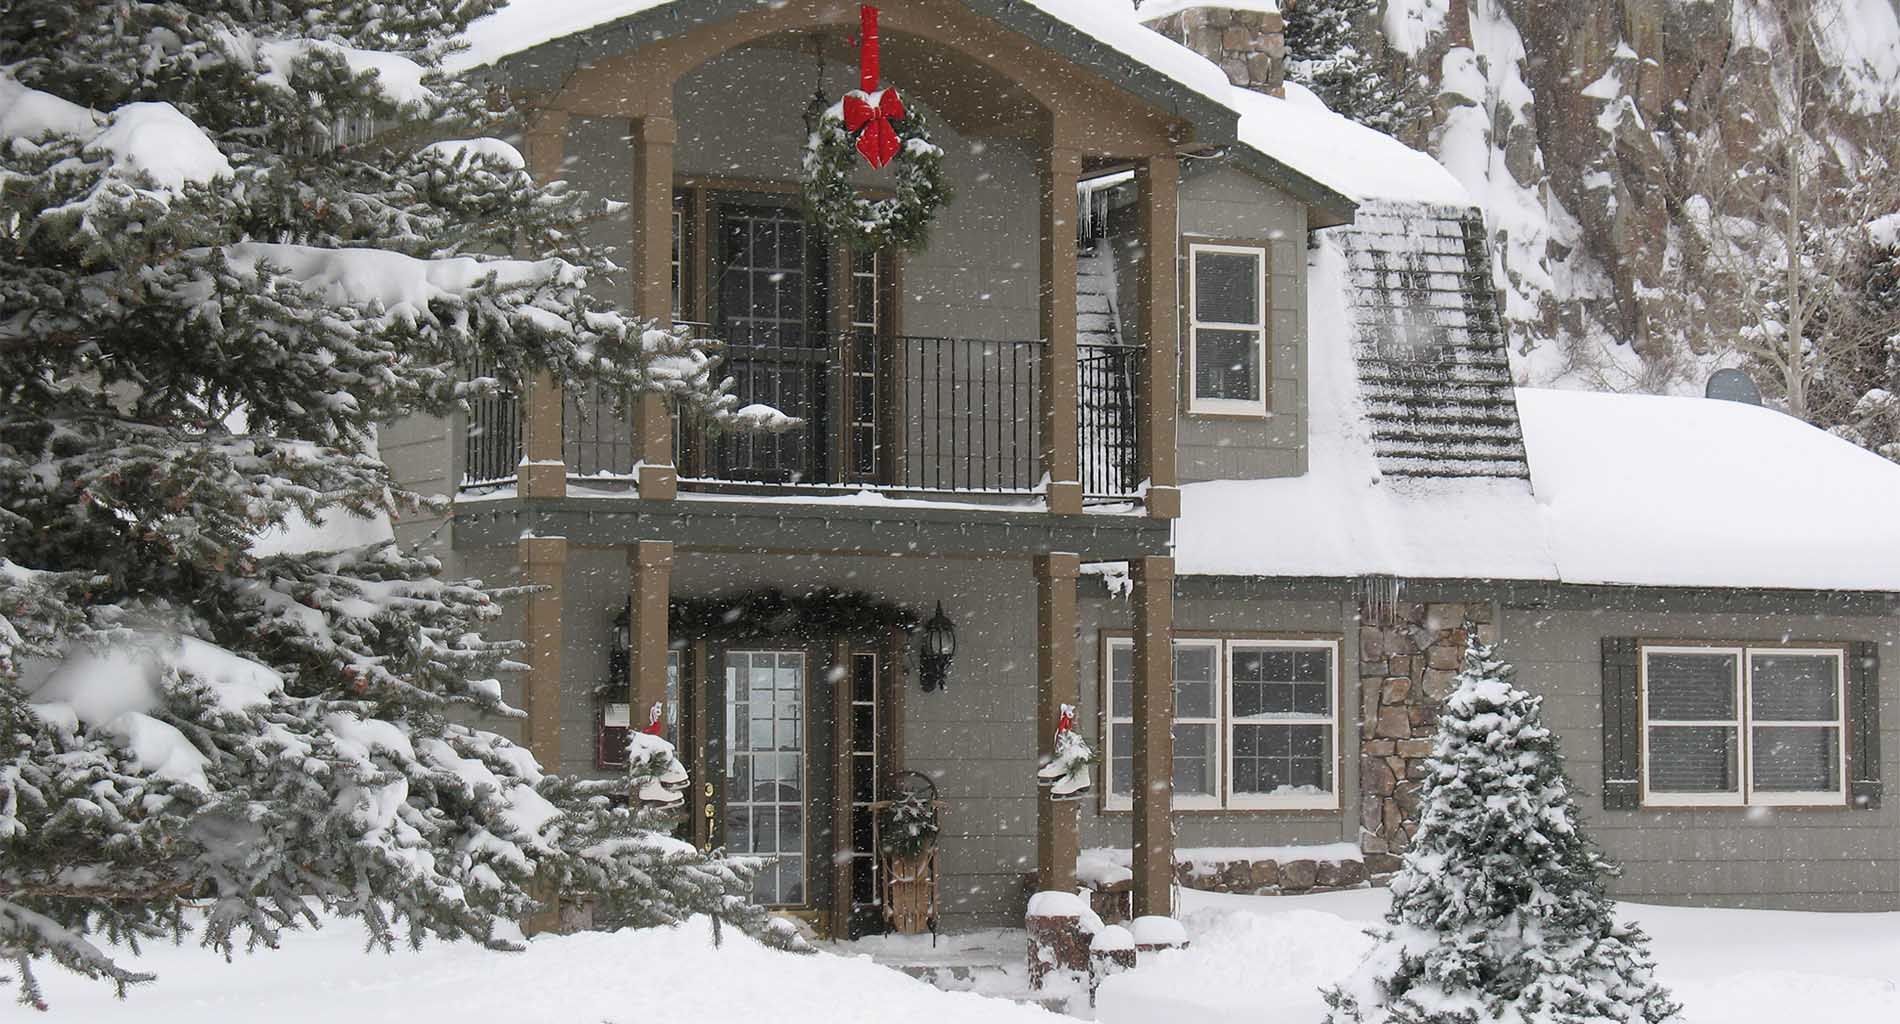 Picture of the home with snow.